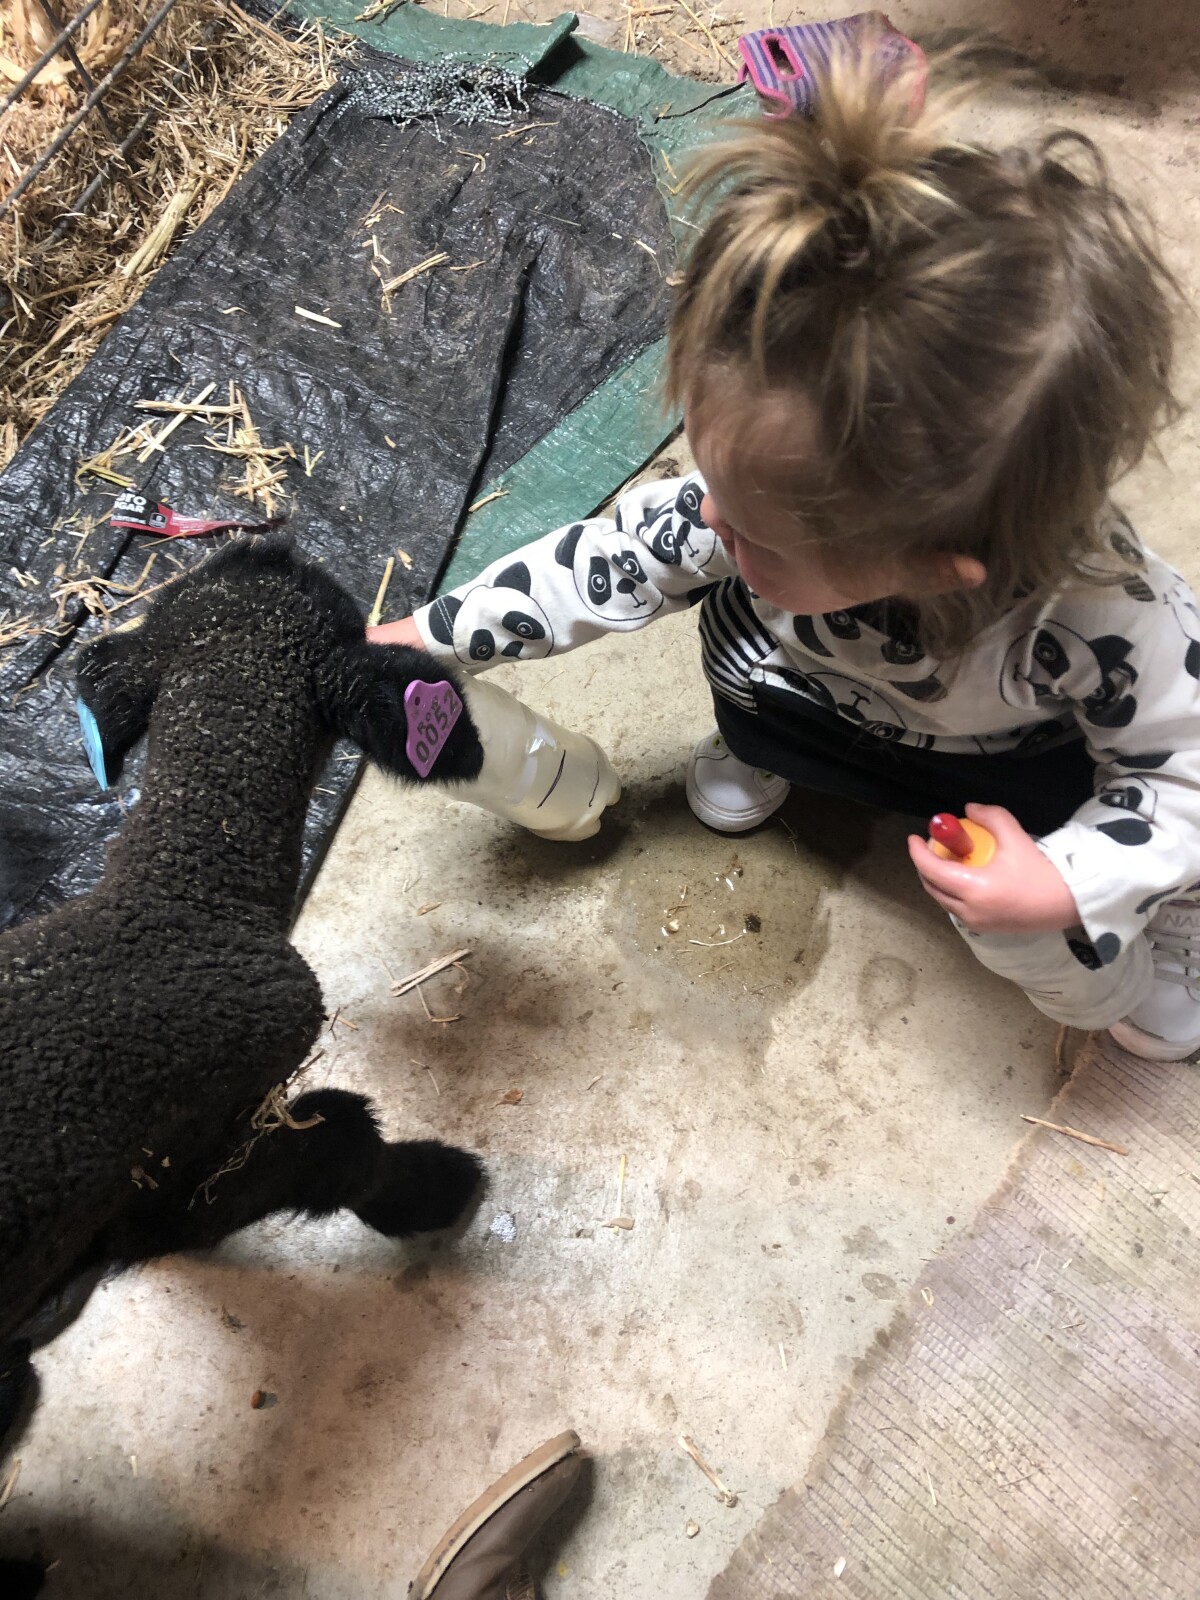 How to Care for Orphan Lambs